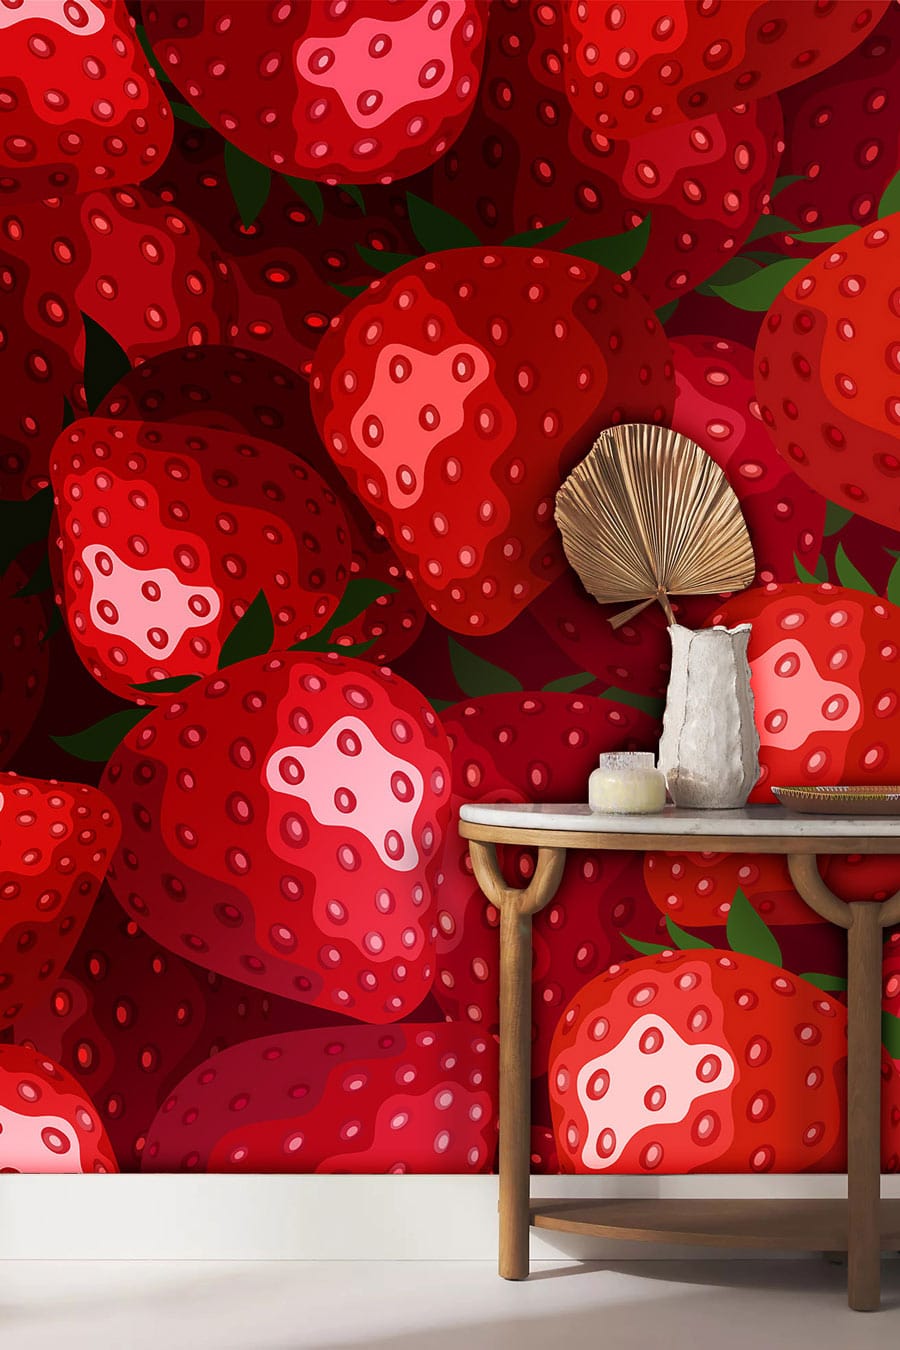 wallpaper louge with a fruit strawbery design